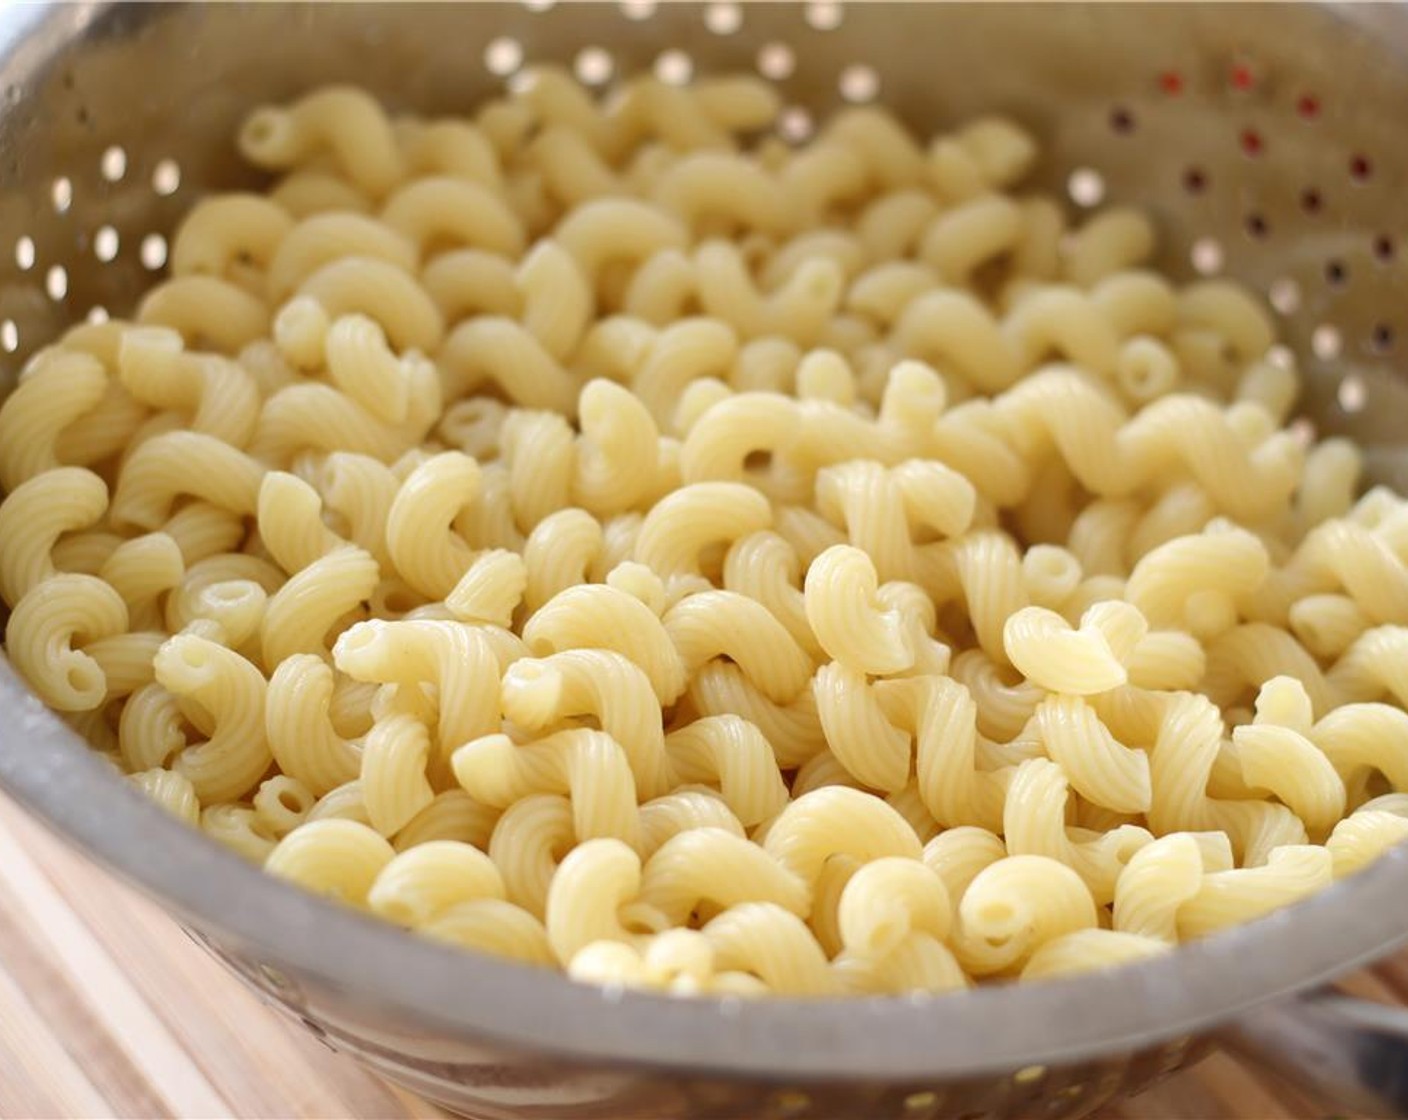 step 1 Make Cavatappi Pasta (8 oz) according to package directions. Drain and rinse in cold water. Set aside.